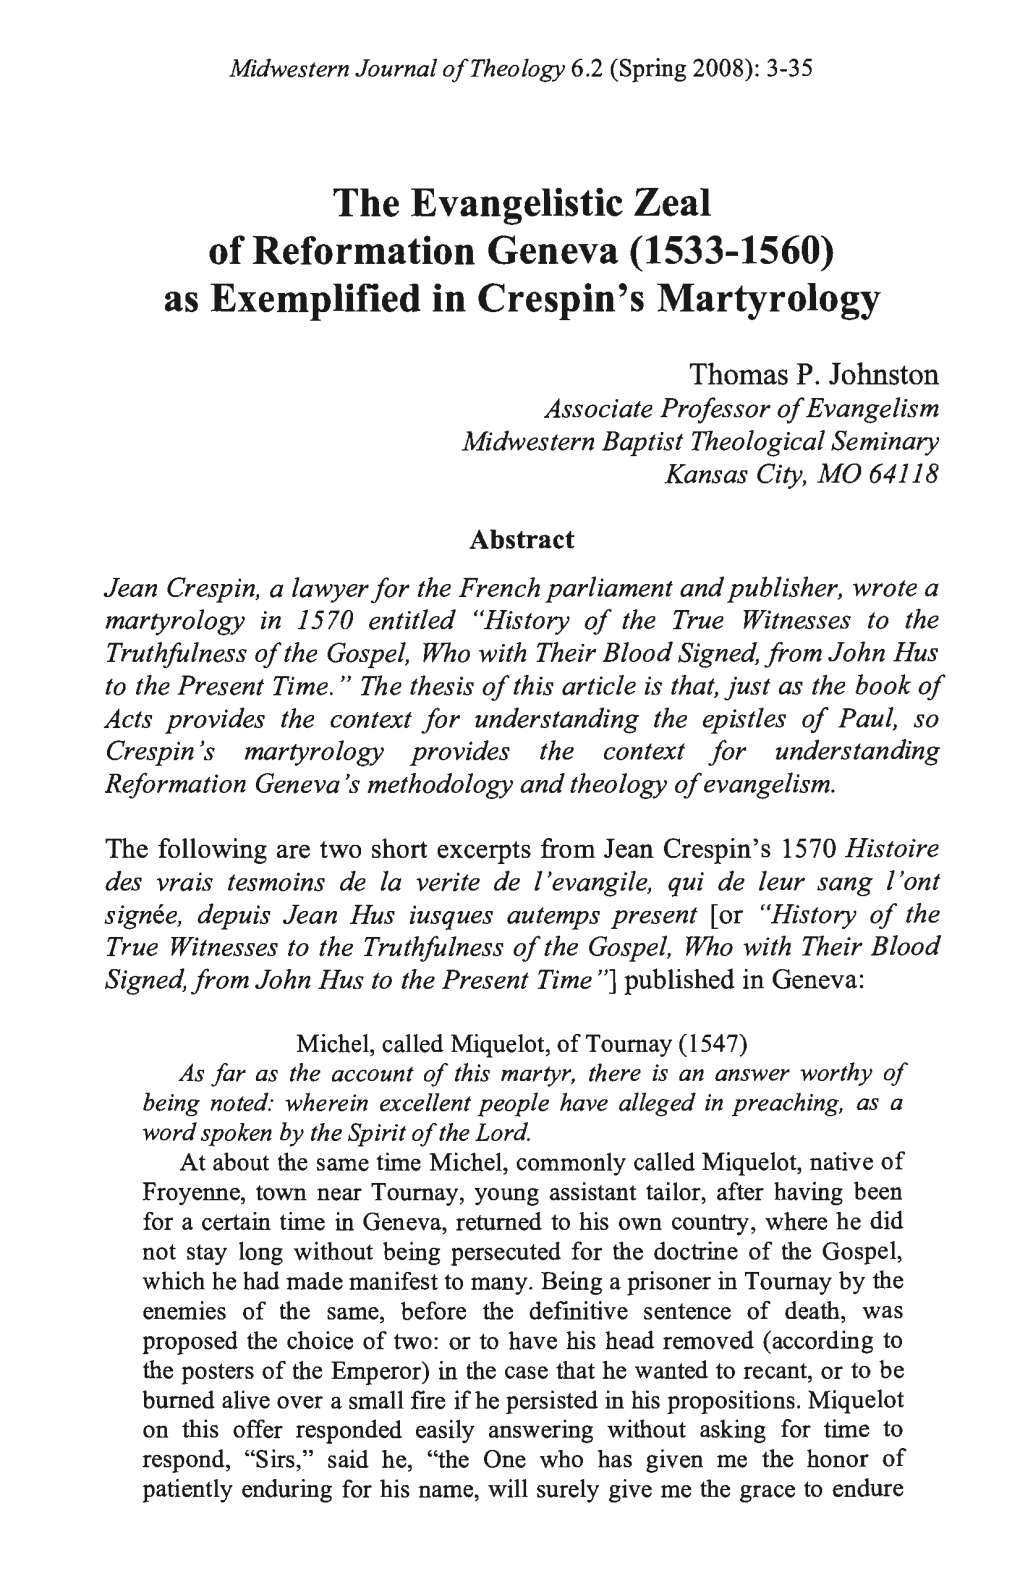 The Evangelistic Zeal of Reformation Geneva (1533-1560) As Exemplified in Crespin's Martyrology